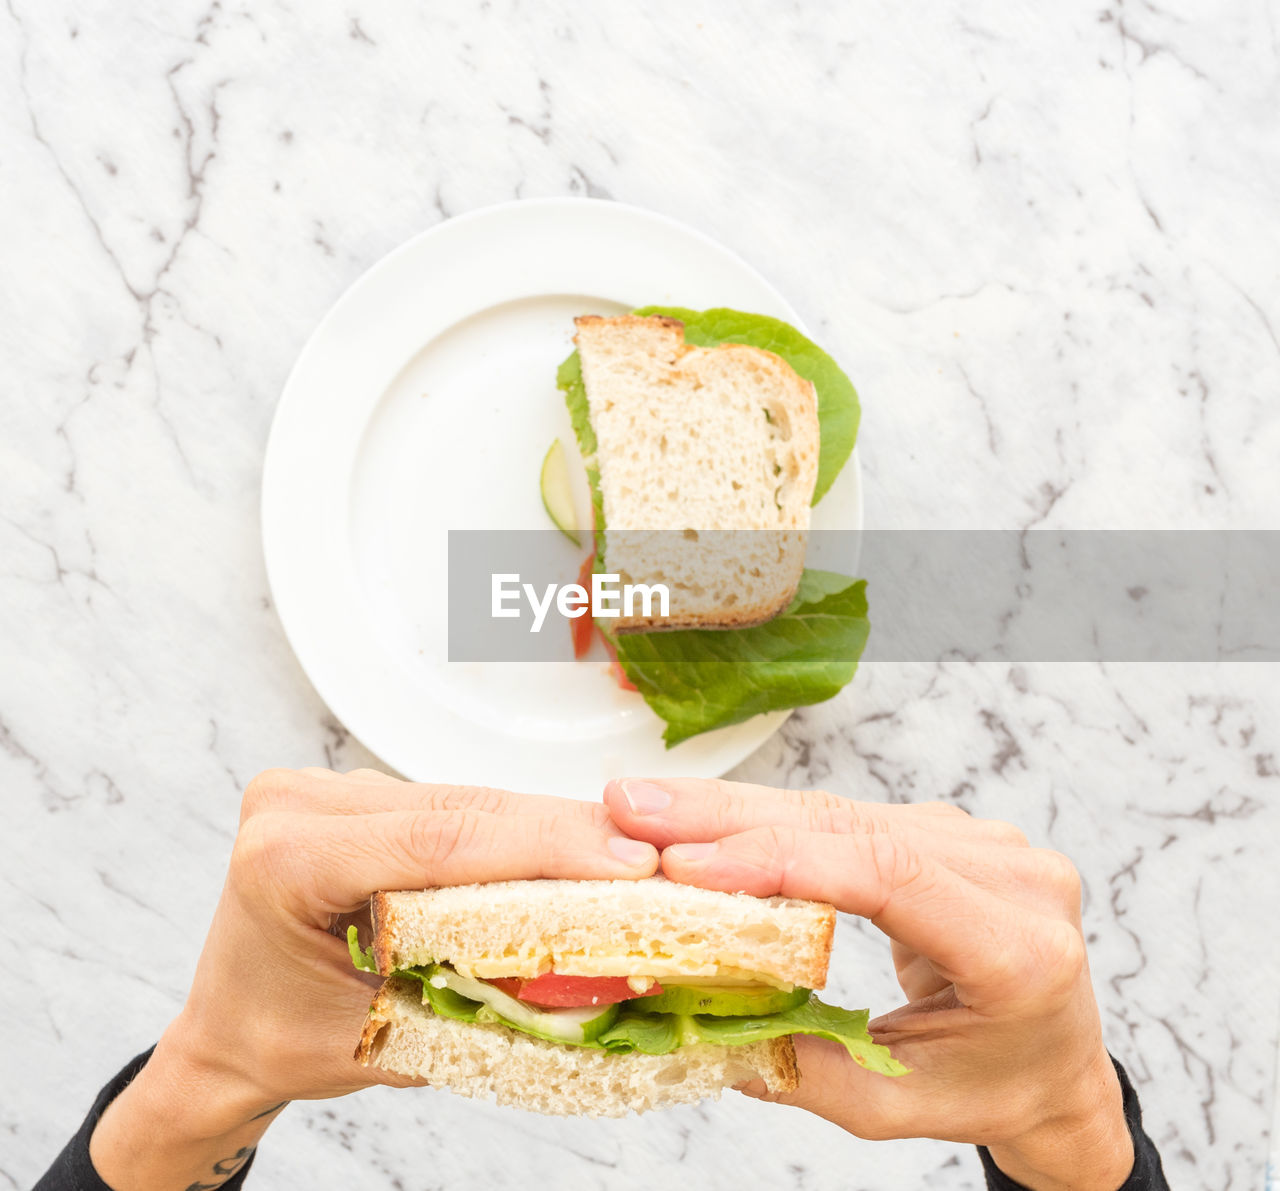 Cropped hands of woman holding sandwich